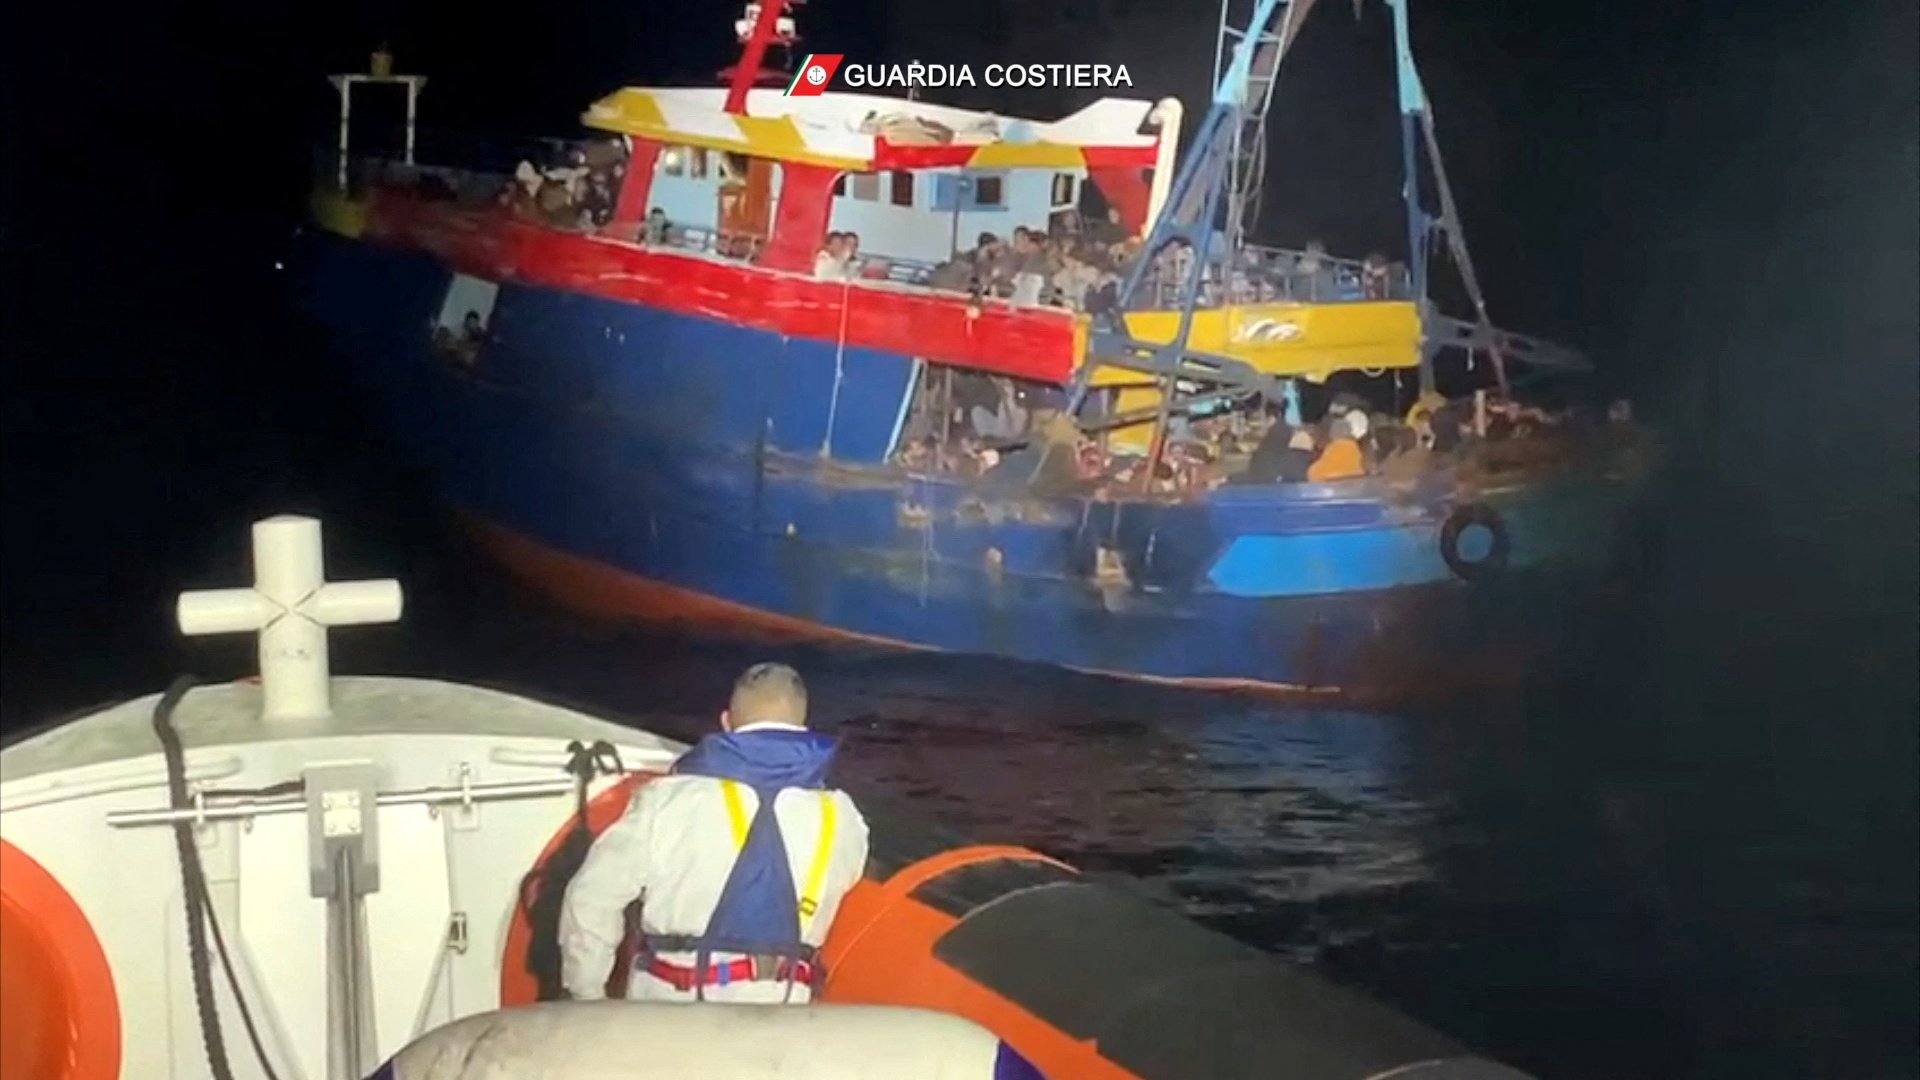 Migrants wait to be rescued by Italian coast guard during a search and rescue operation off the coast of Italy, Feb. 22, 2022, in this screen grab taken from a handout video. (CNS photo/Italian Coast Guard/handout via Reuters)